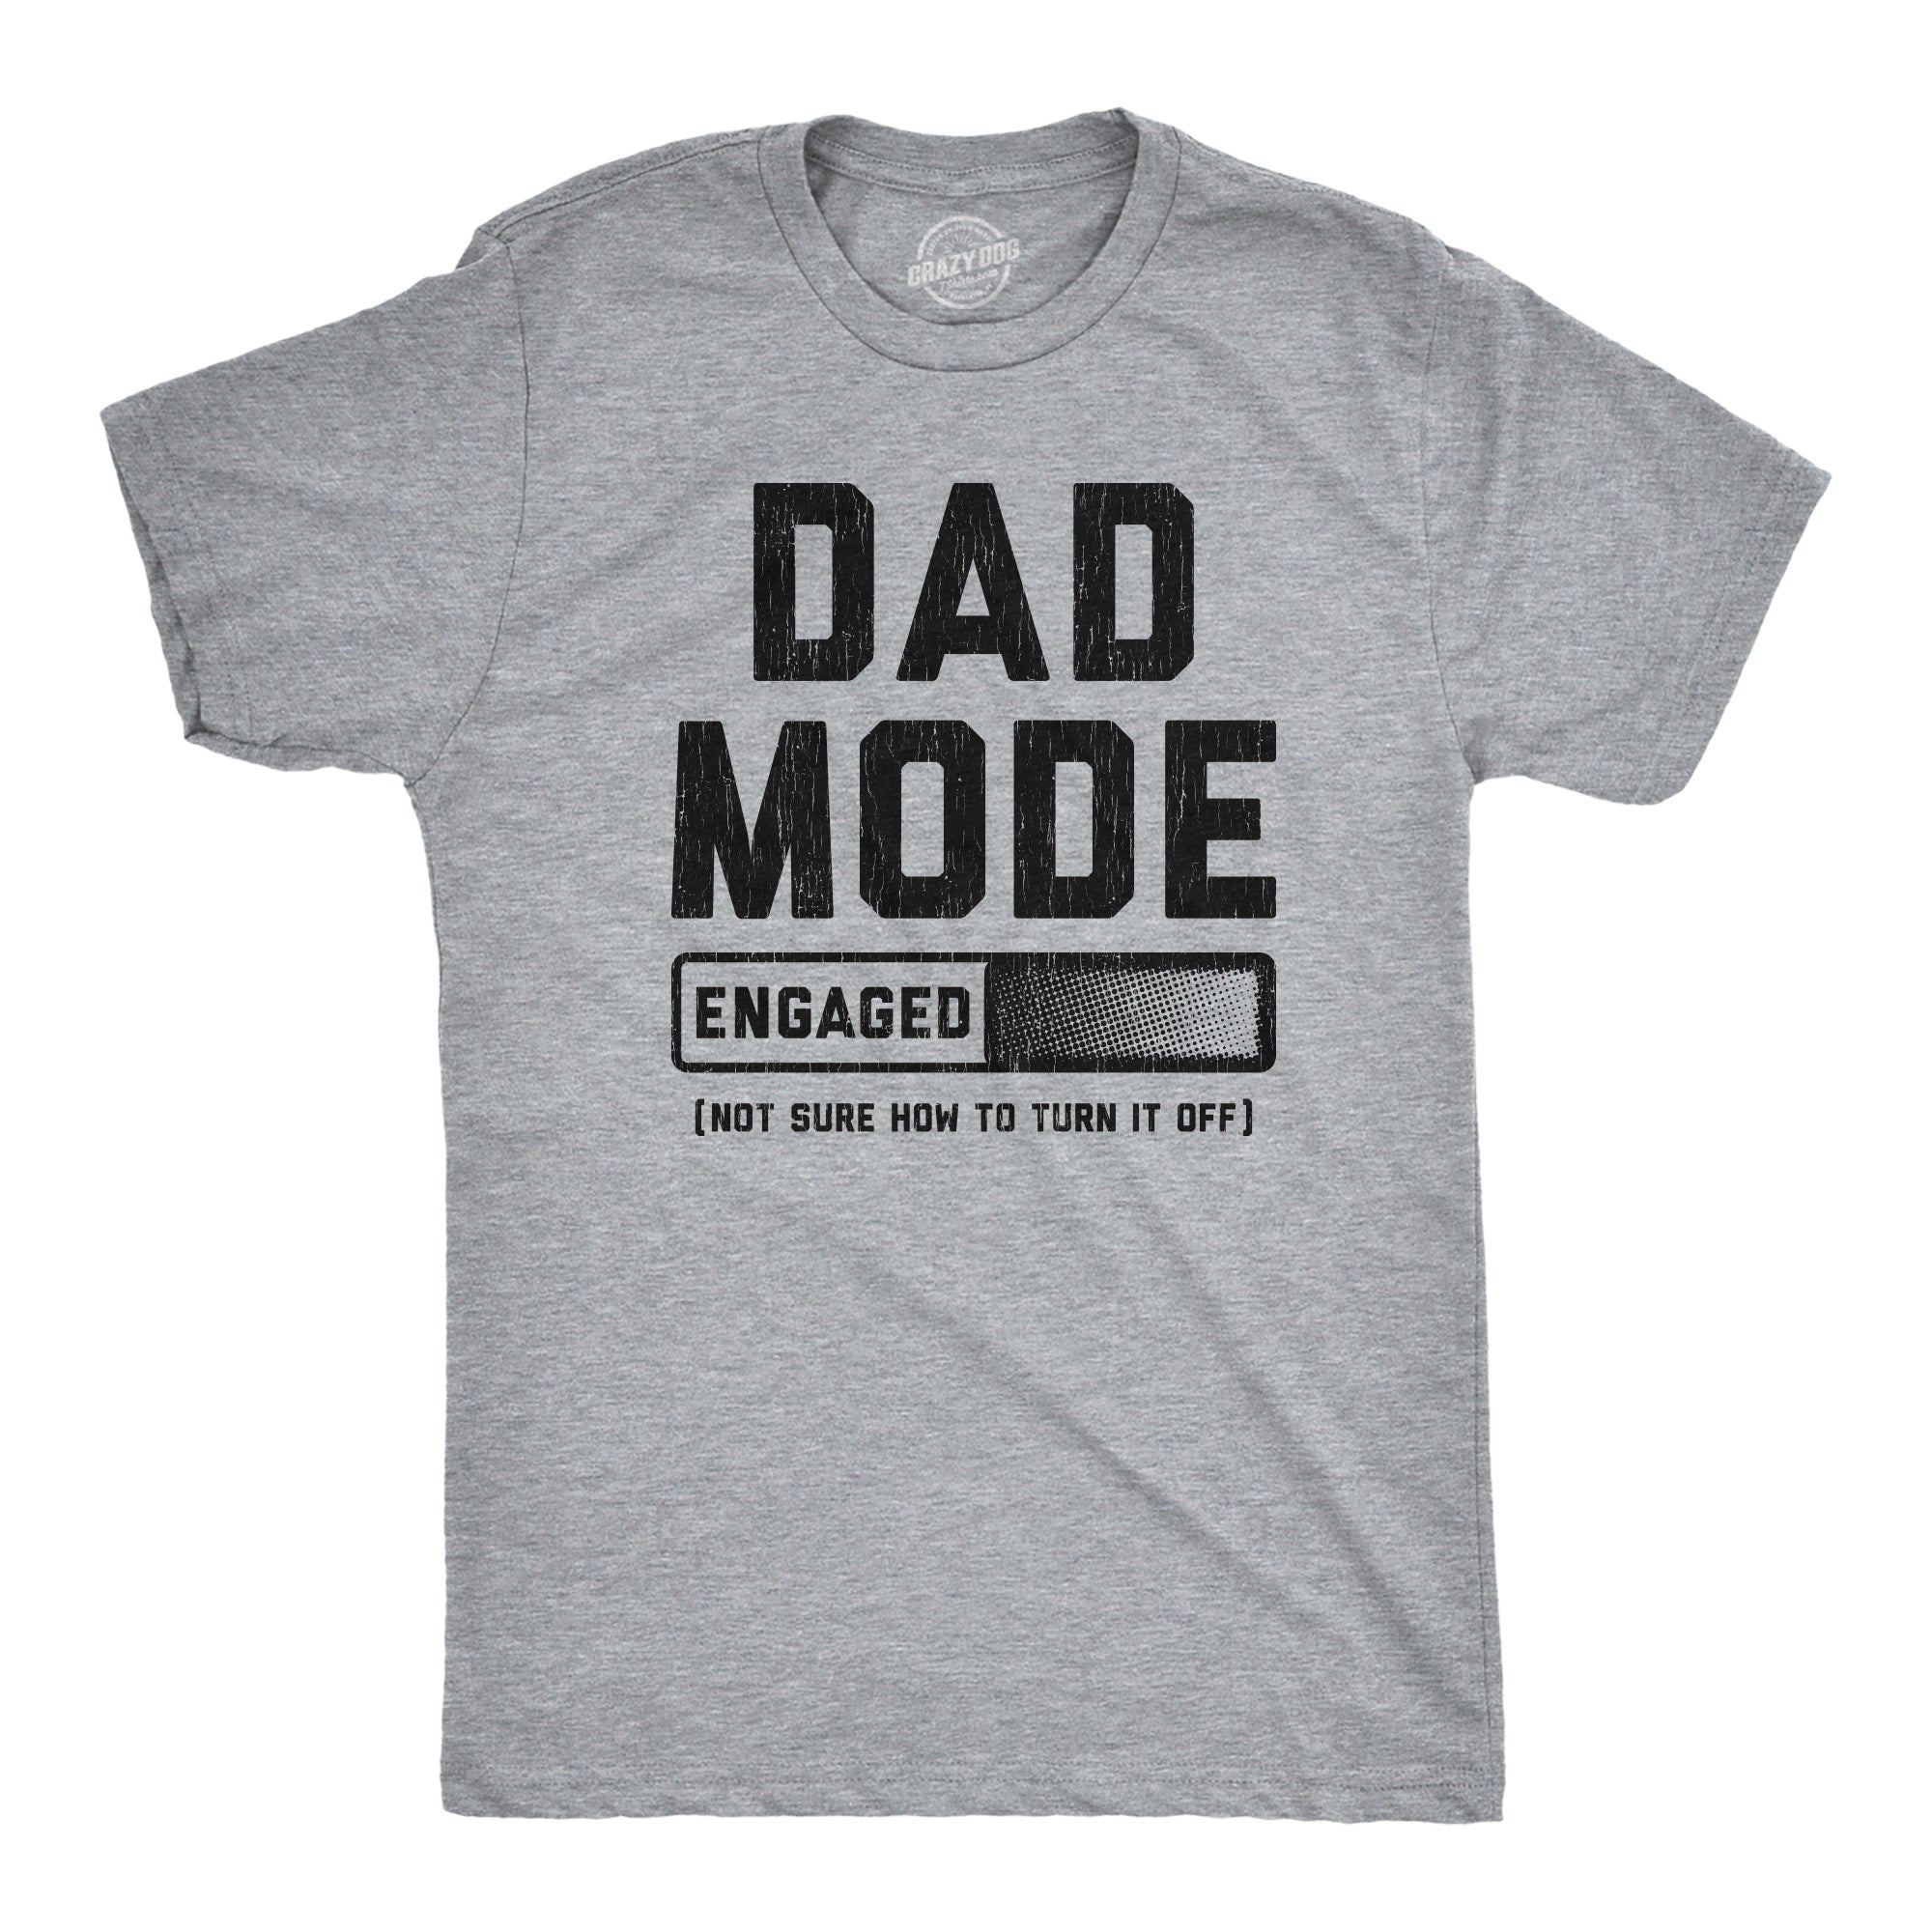 Funny Light Heather Grey - DADMODE Dad Mode Engaged Mens T Shirt Nerdy Father's Day sarcastic Tee